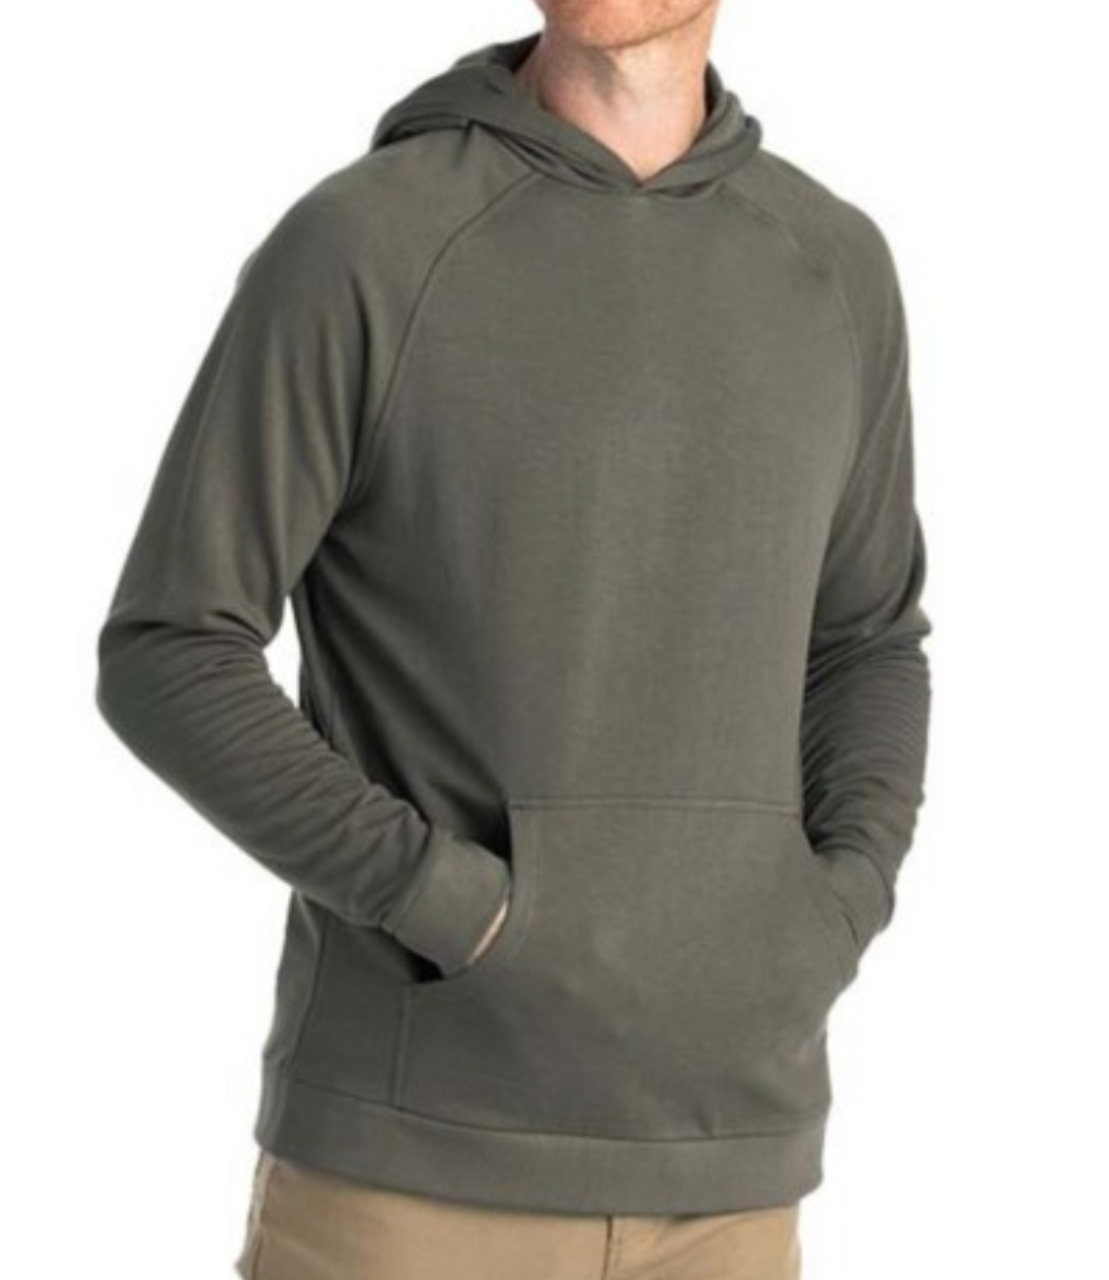 Wyoming Fly Fishing Free Fly Men's Bamboo Lightweight Fleece Hoody  Embroidered Fatigue